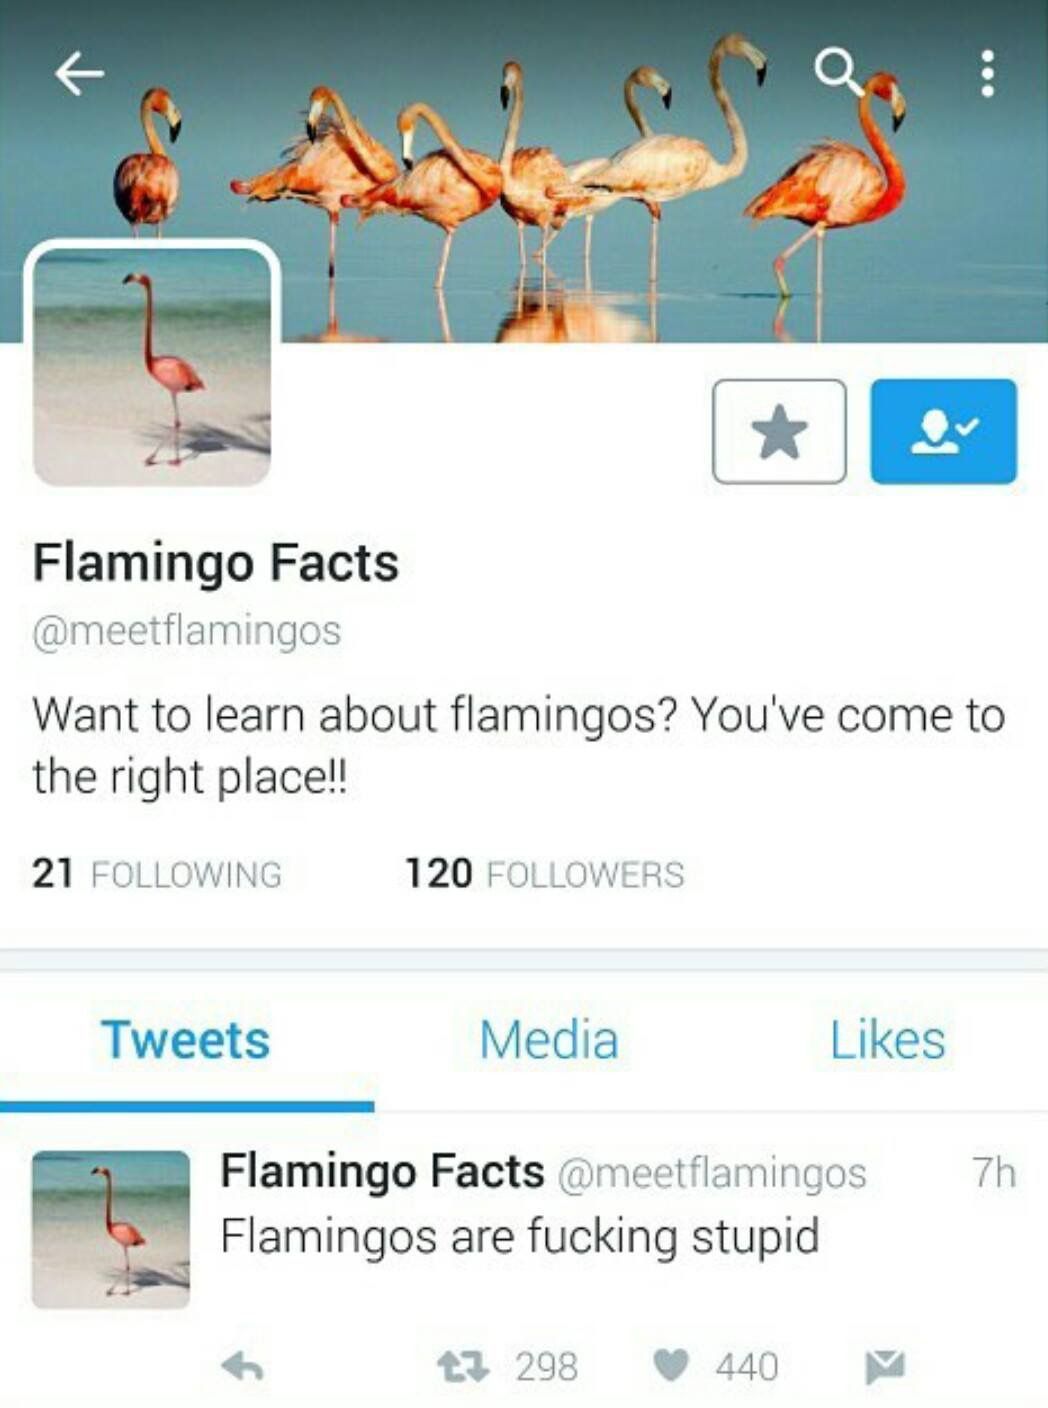 flamingos are fucking stupid - Flamingo Facts Want to learn about flamingos? You've come to the right place!! 21 ing 120 ers Tweets Media 7h Flamingo Facts Flamingos are fucking stupid tj 298 440